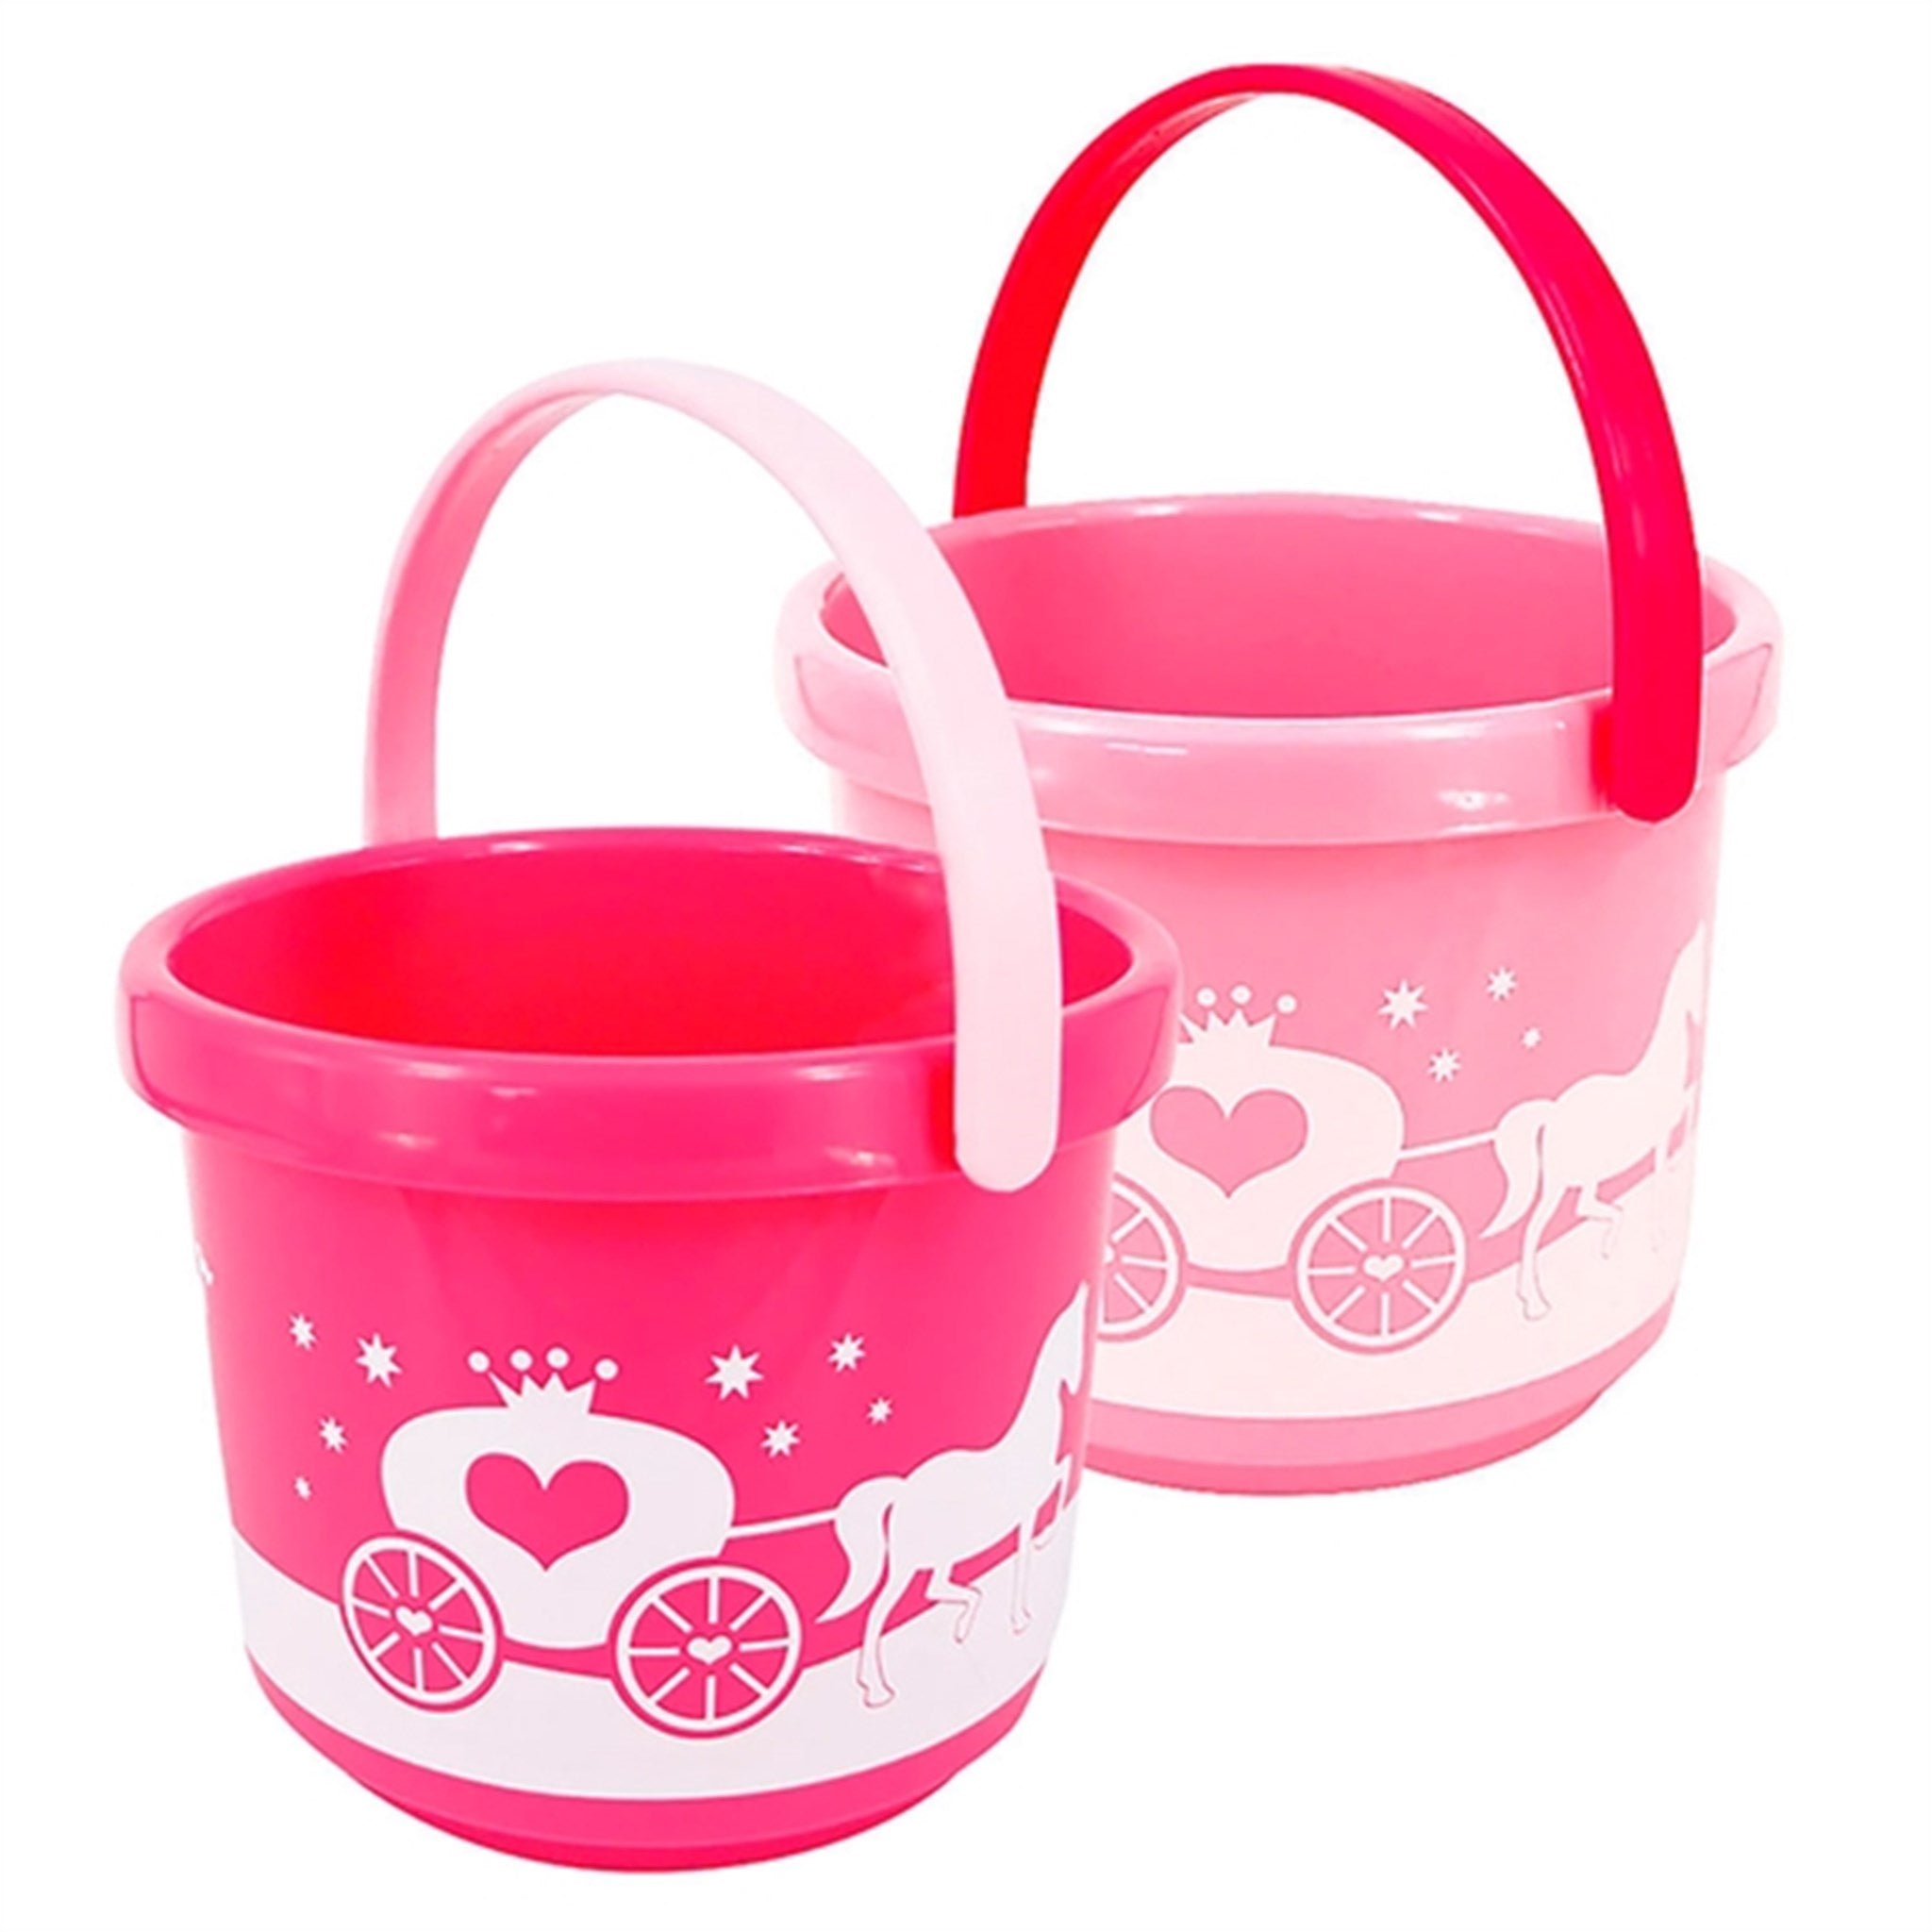 Spielstabil Lille Spand Prinsesse - Pink 2